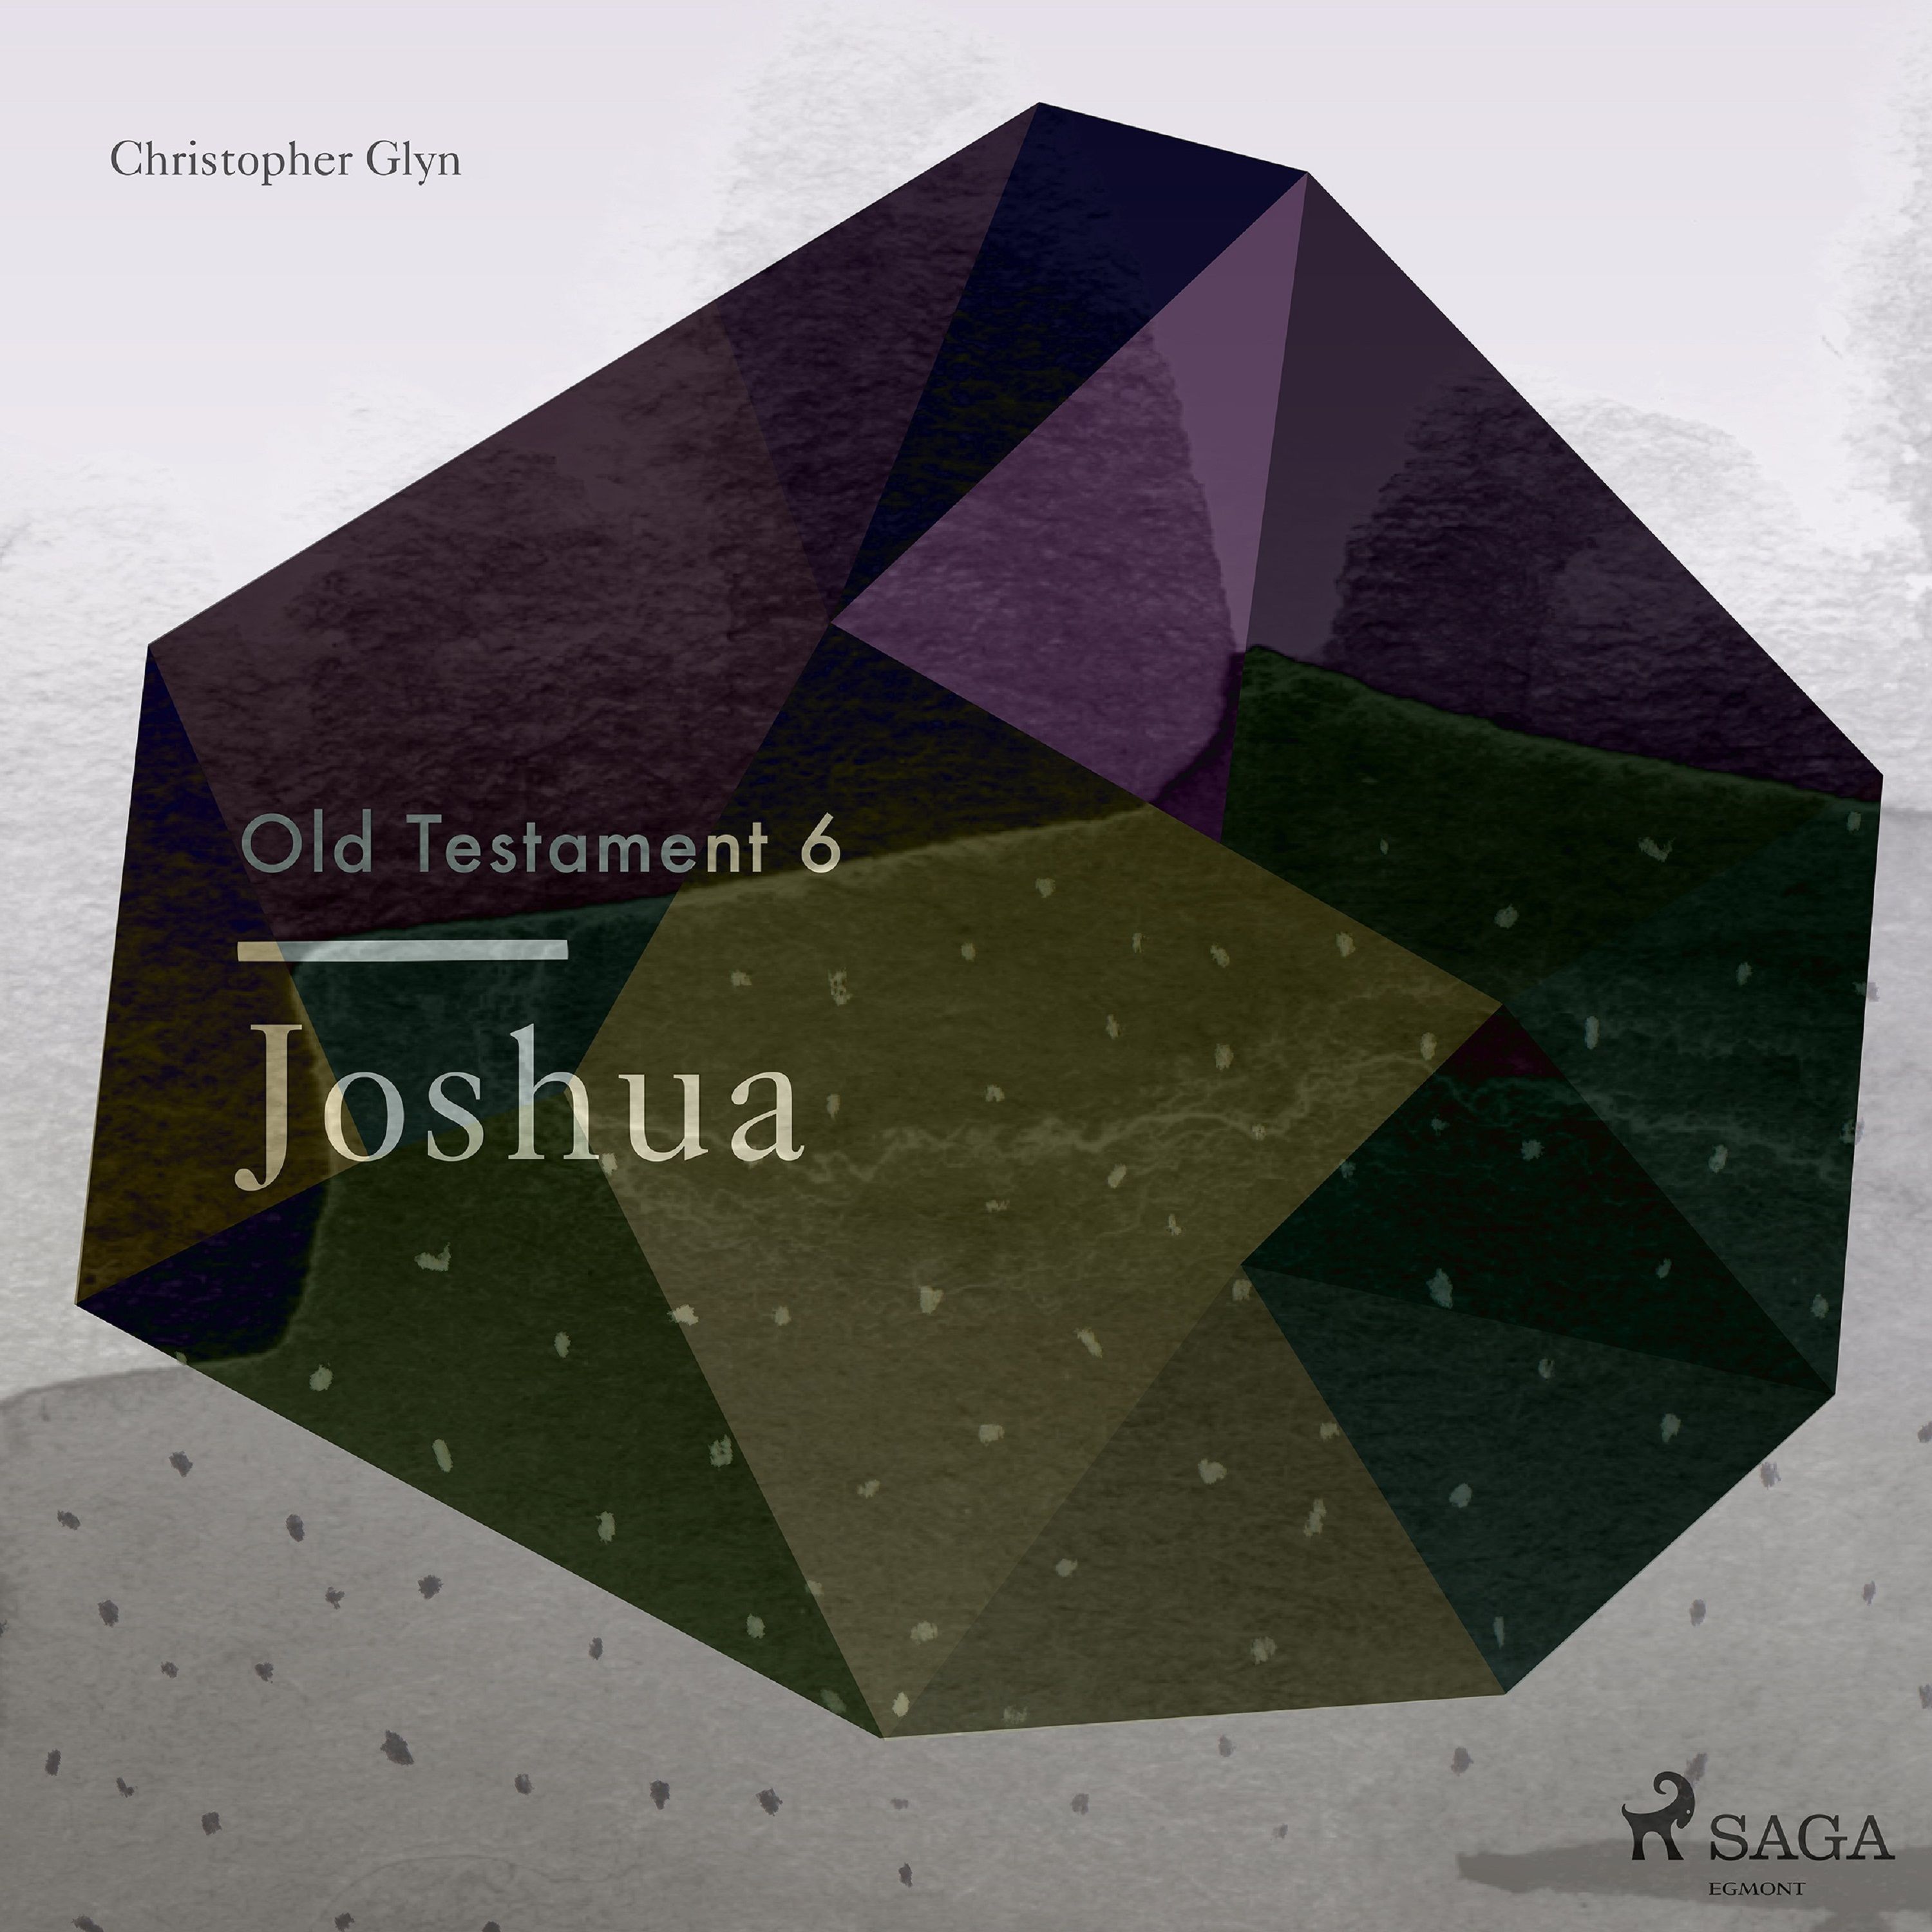 The Old Testament 6 - Joshua, audiobook by Christopher Glyn